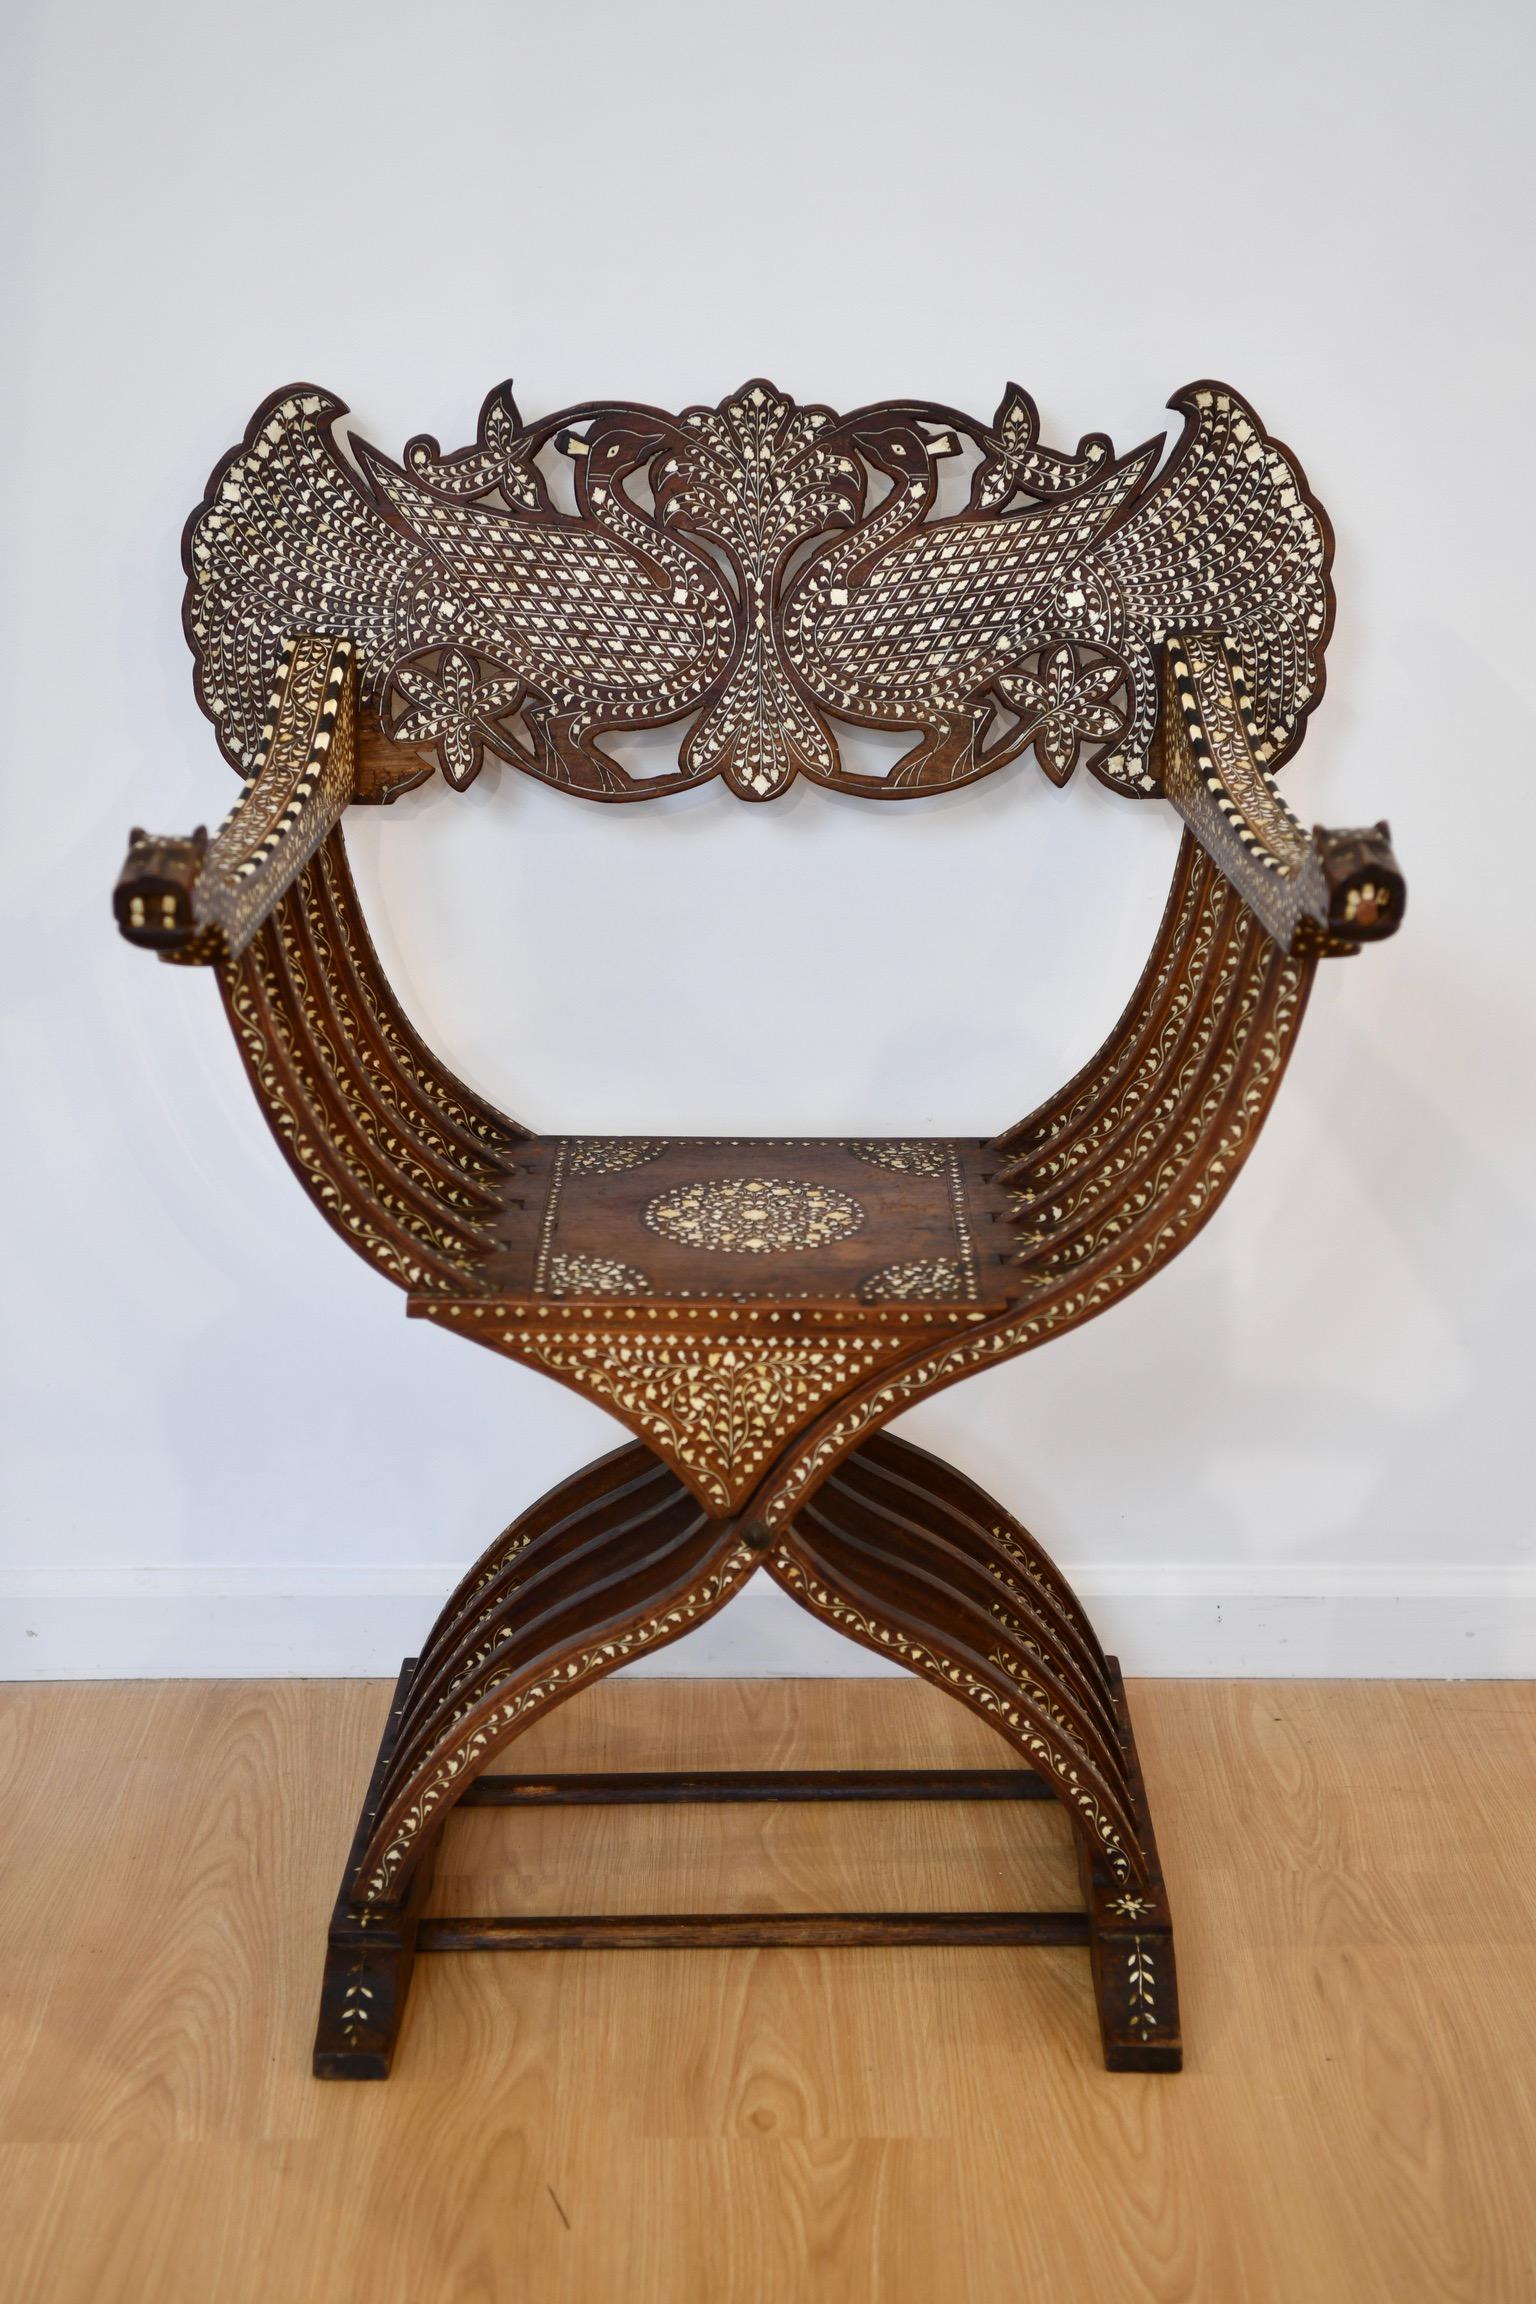 Syrian savonarola chair with elaborate mother of pearl inlay and etched faces at arms' end. Back and seat piece can be removed, pictured. Slight damage to the wood on back piece, also pictured. Dimensions: 37.5